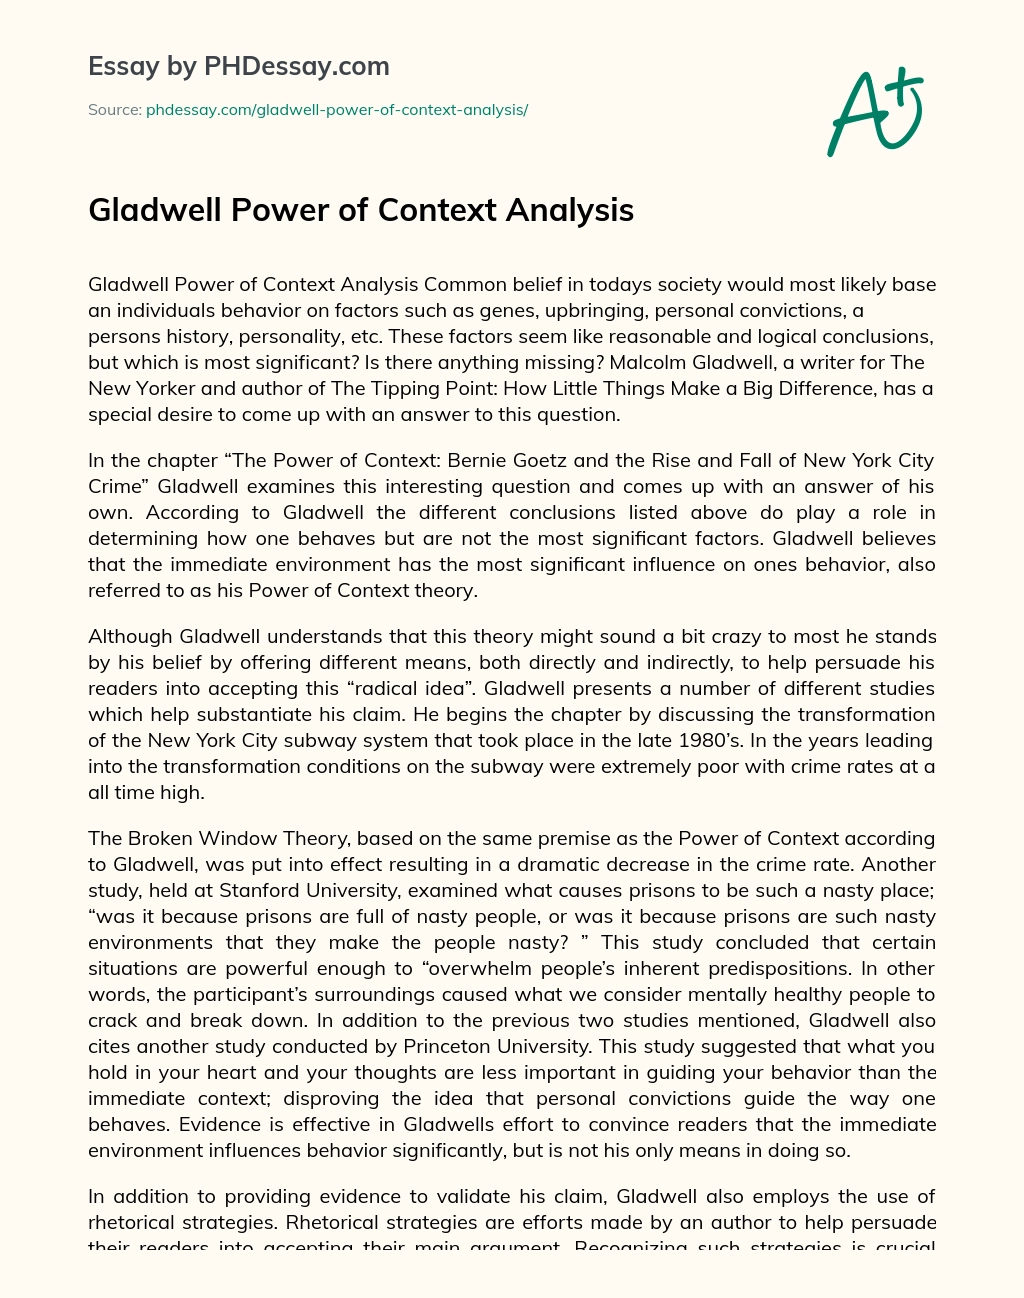 Gladwell Power of Context Analysis essay